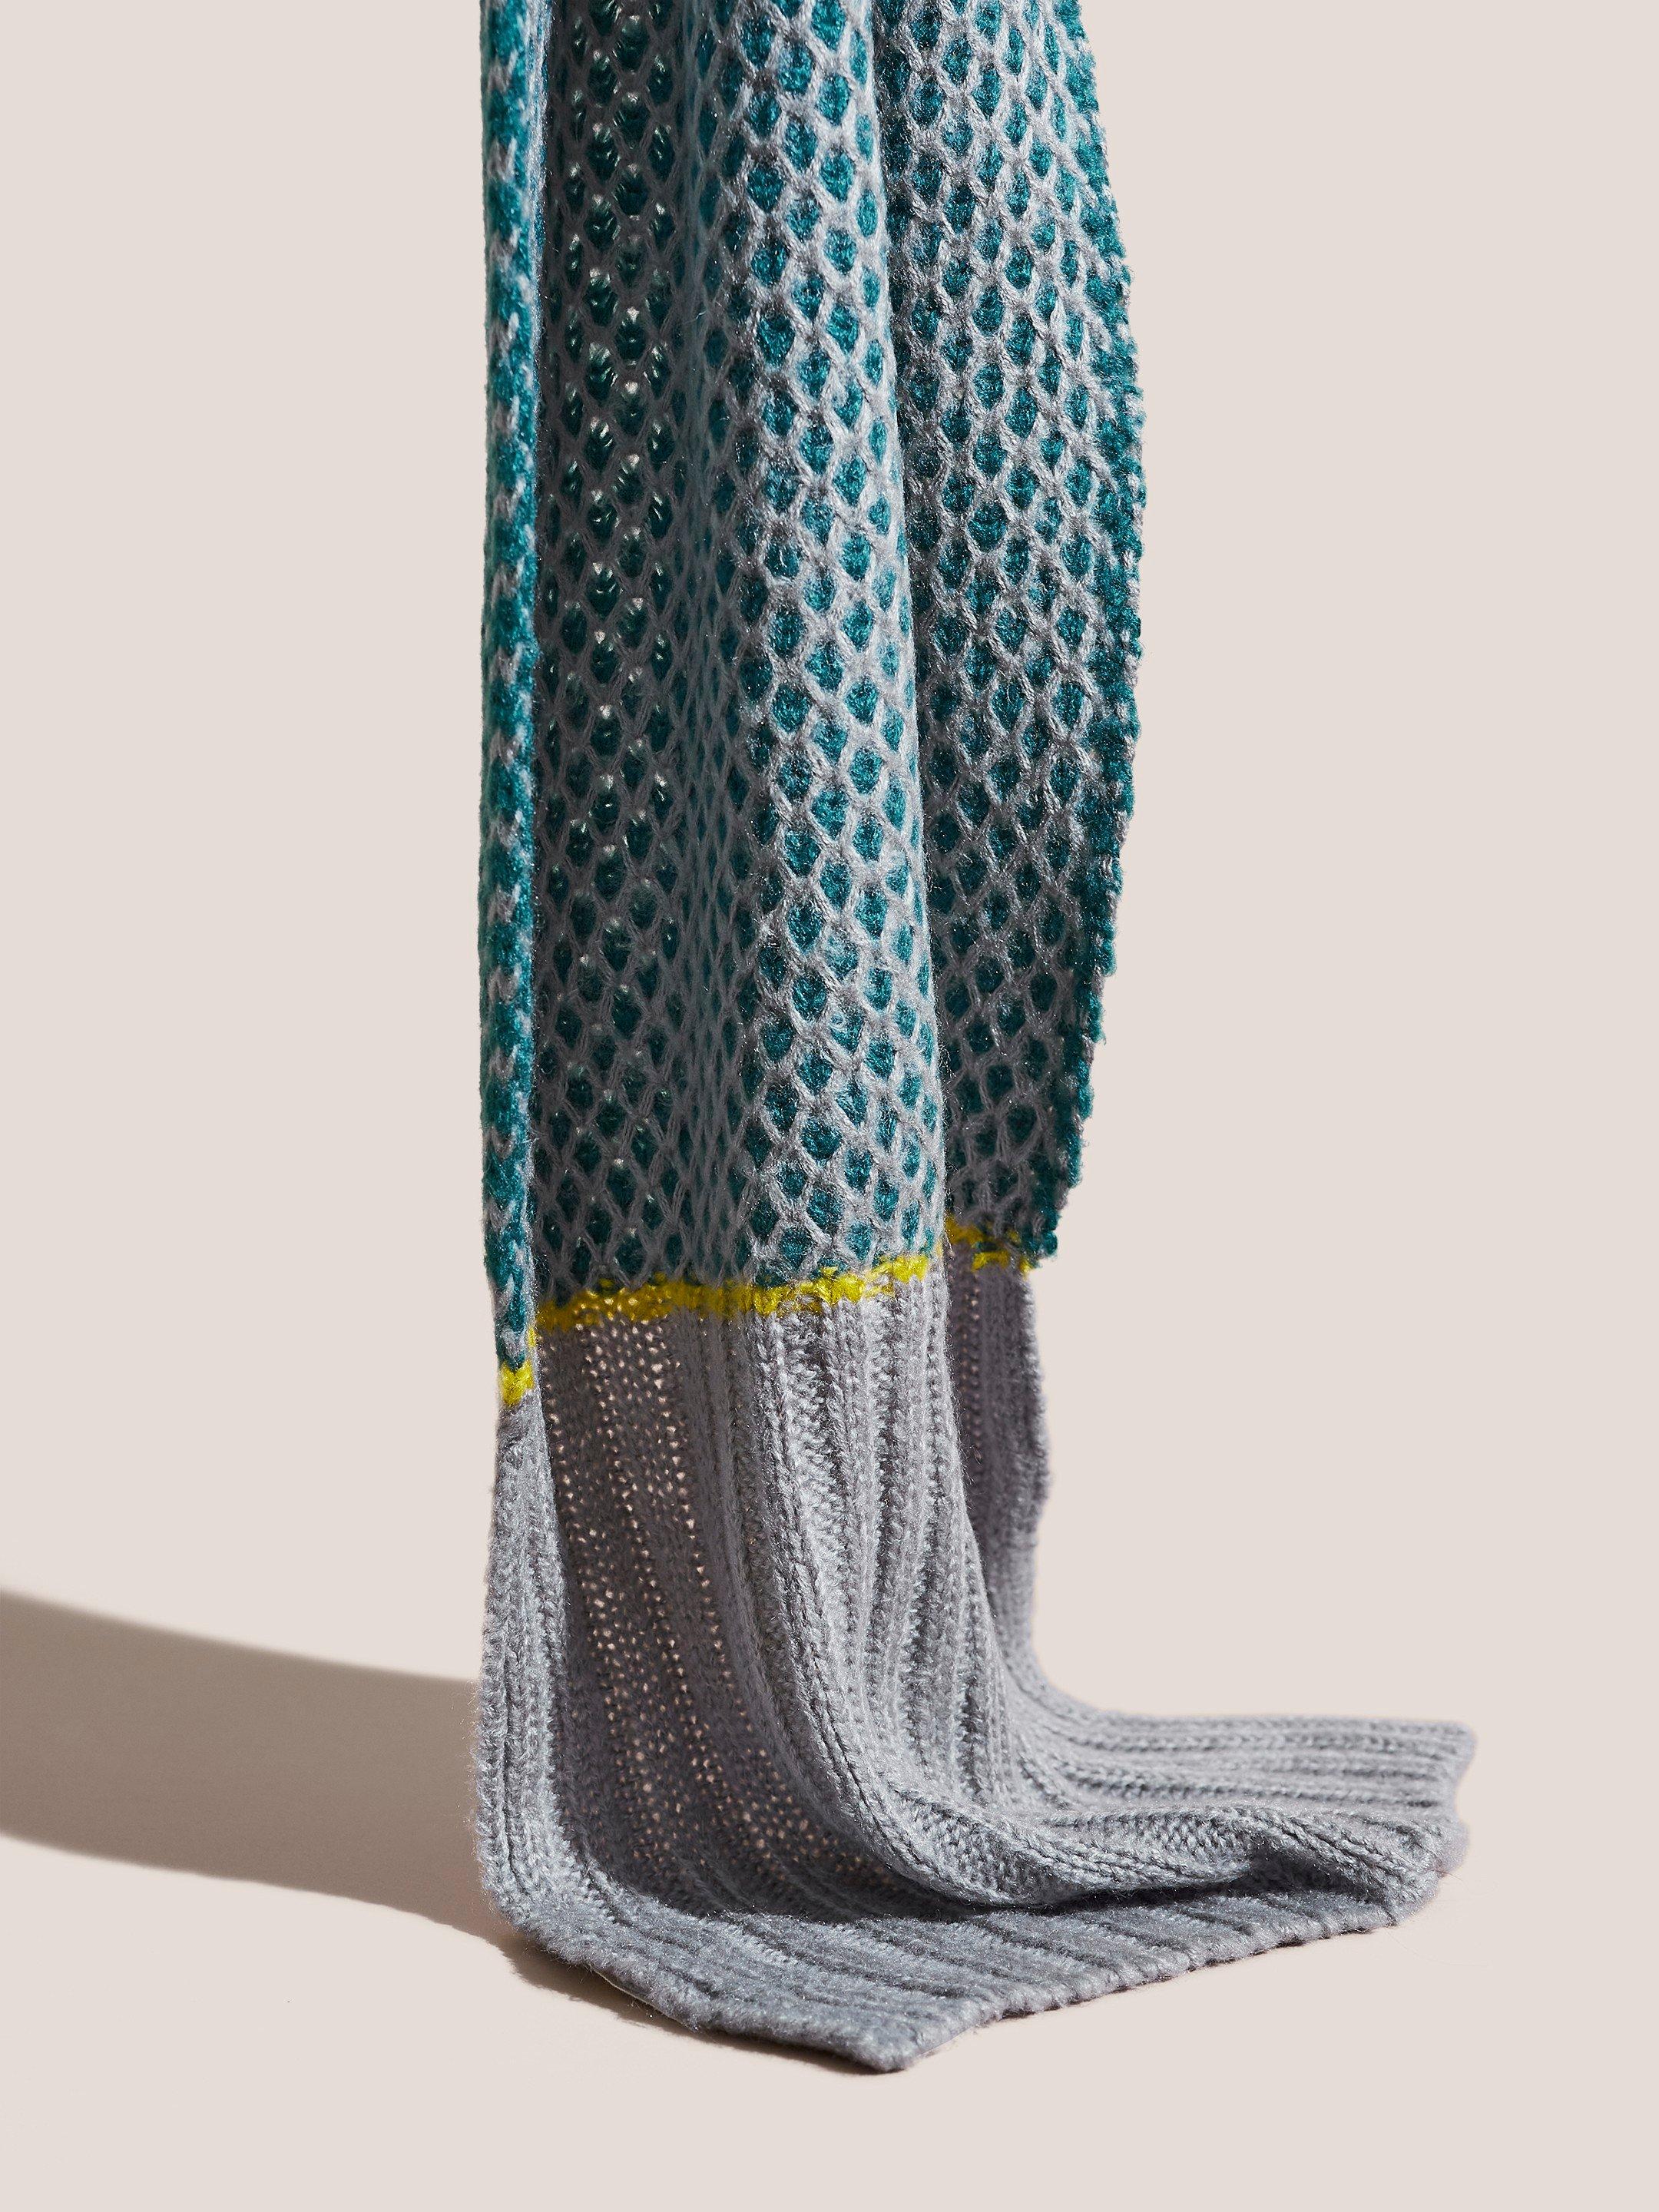 Honeycomb Knitted Scarf in TEAL MLT - FLAT DETAIL